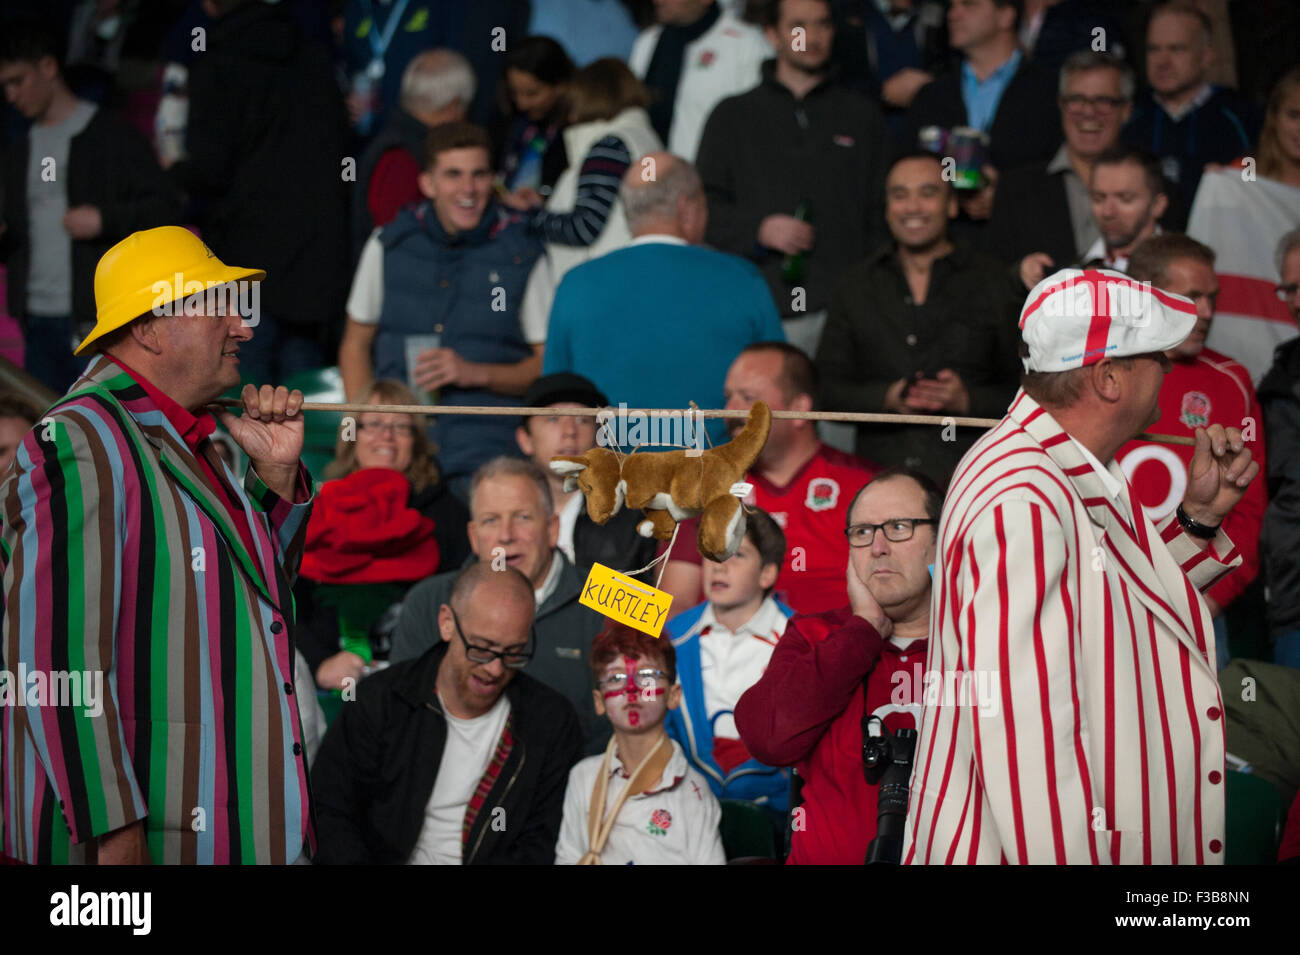 Twickenham Stadium, London, UK. 3rd October, 2015. Eccentric supporters with striped blazers at the England v Australia Pool A evening match of the Rugby World Cup 2015 with the final score England 13, Australia 33. Credit:  sportsimages/Alamy Live News Stock Photo